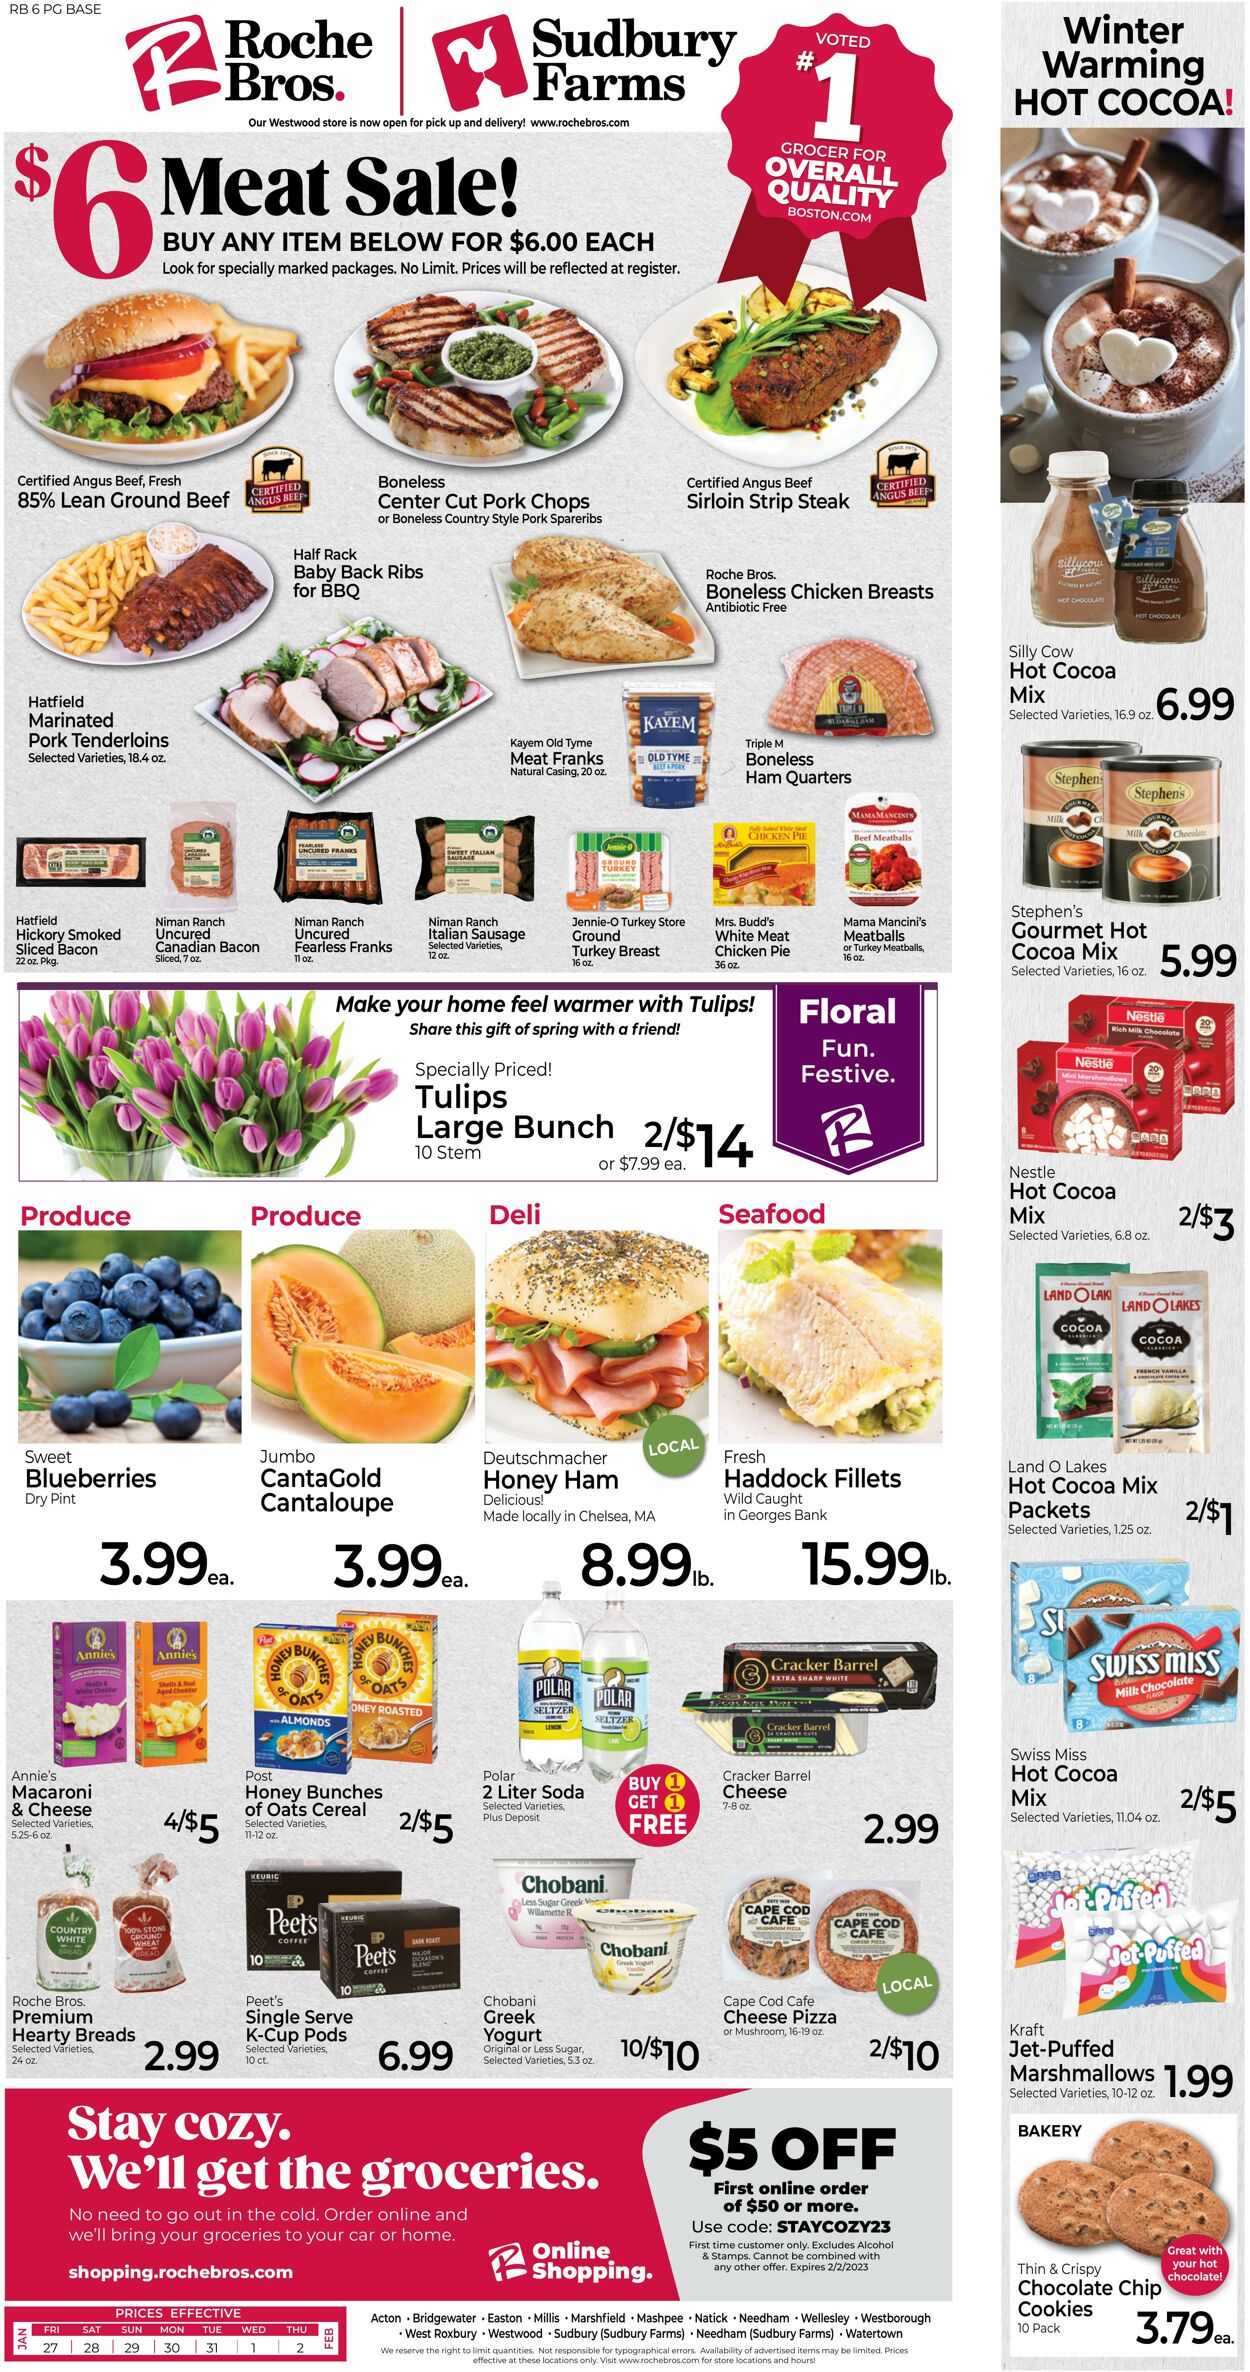 Roche Bros Promotional weekly ads